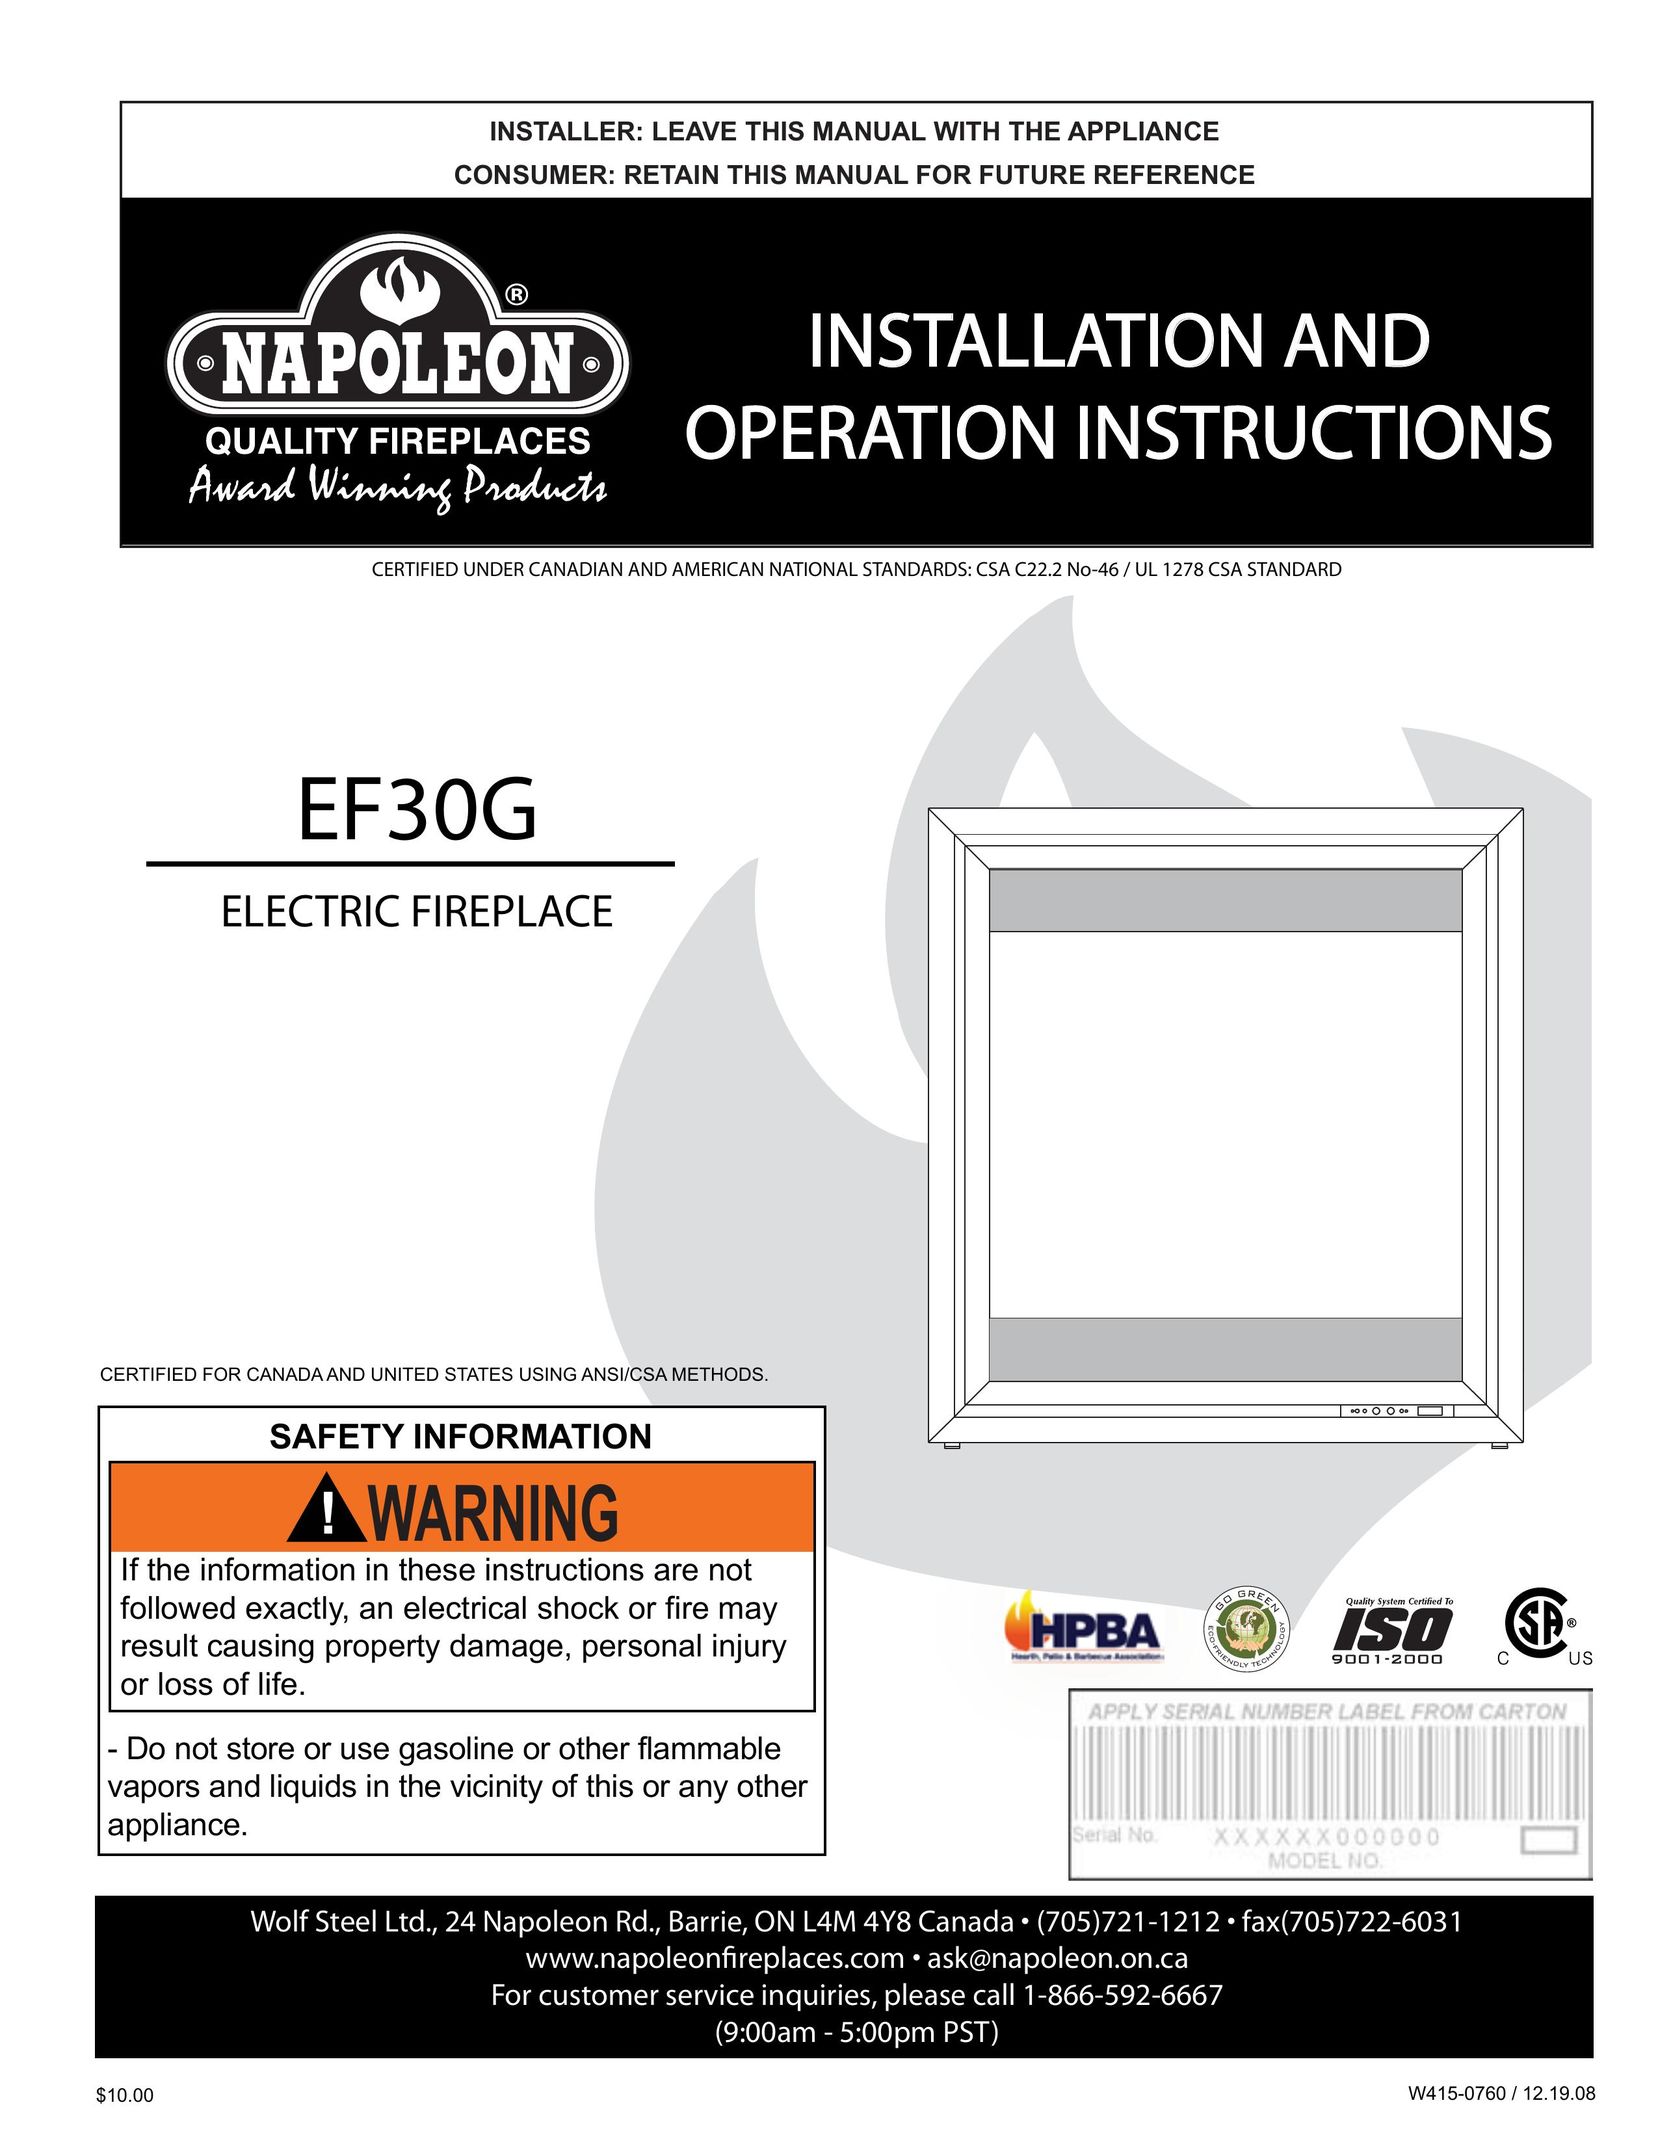 Napoleon Fireplaces EF30G Indoor Fireplace User Manual